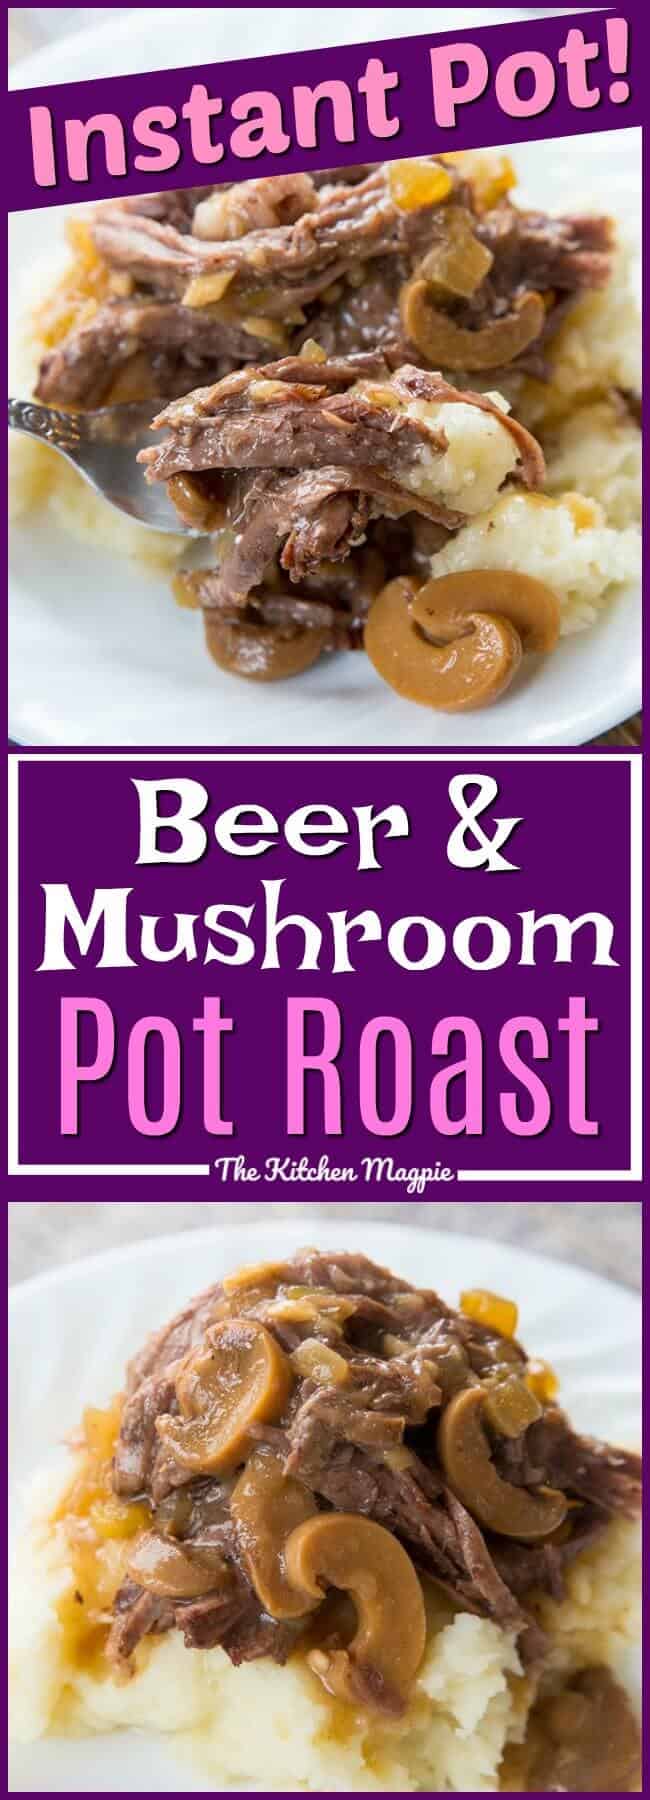 Beer & Mushroom Instant Pot Pot Roast! This delicious pot roast is made in your Instant Pot in only 2 hours and you have fall apart, tender roast beef! Recipe from @kitchenmagpie